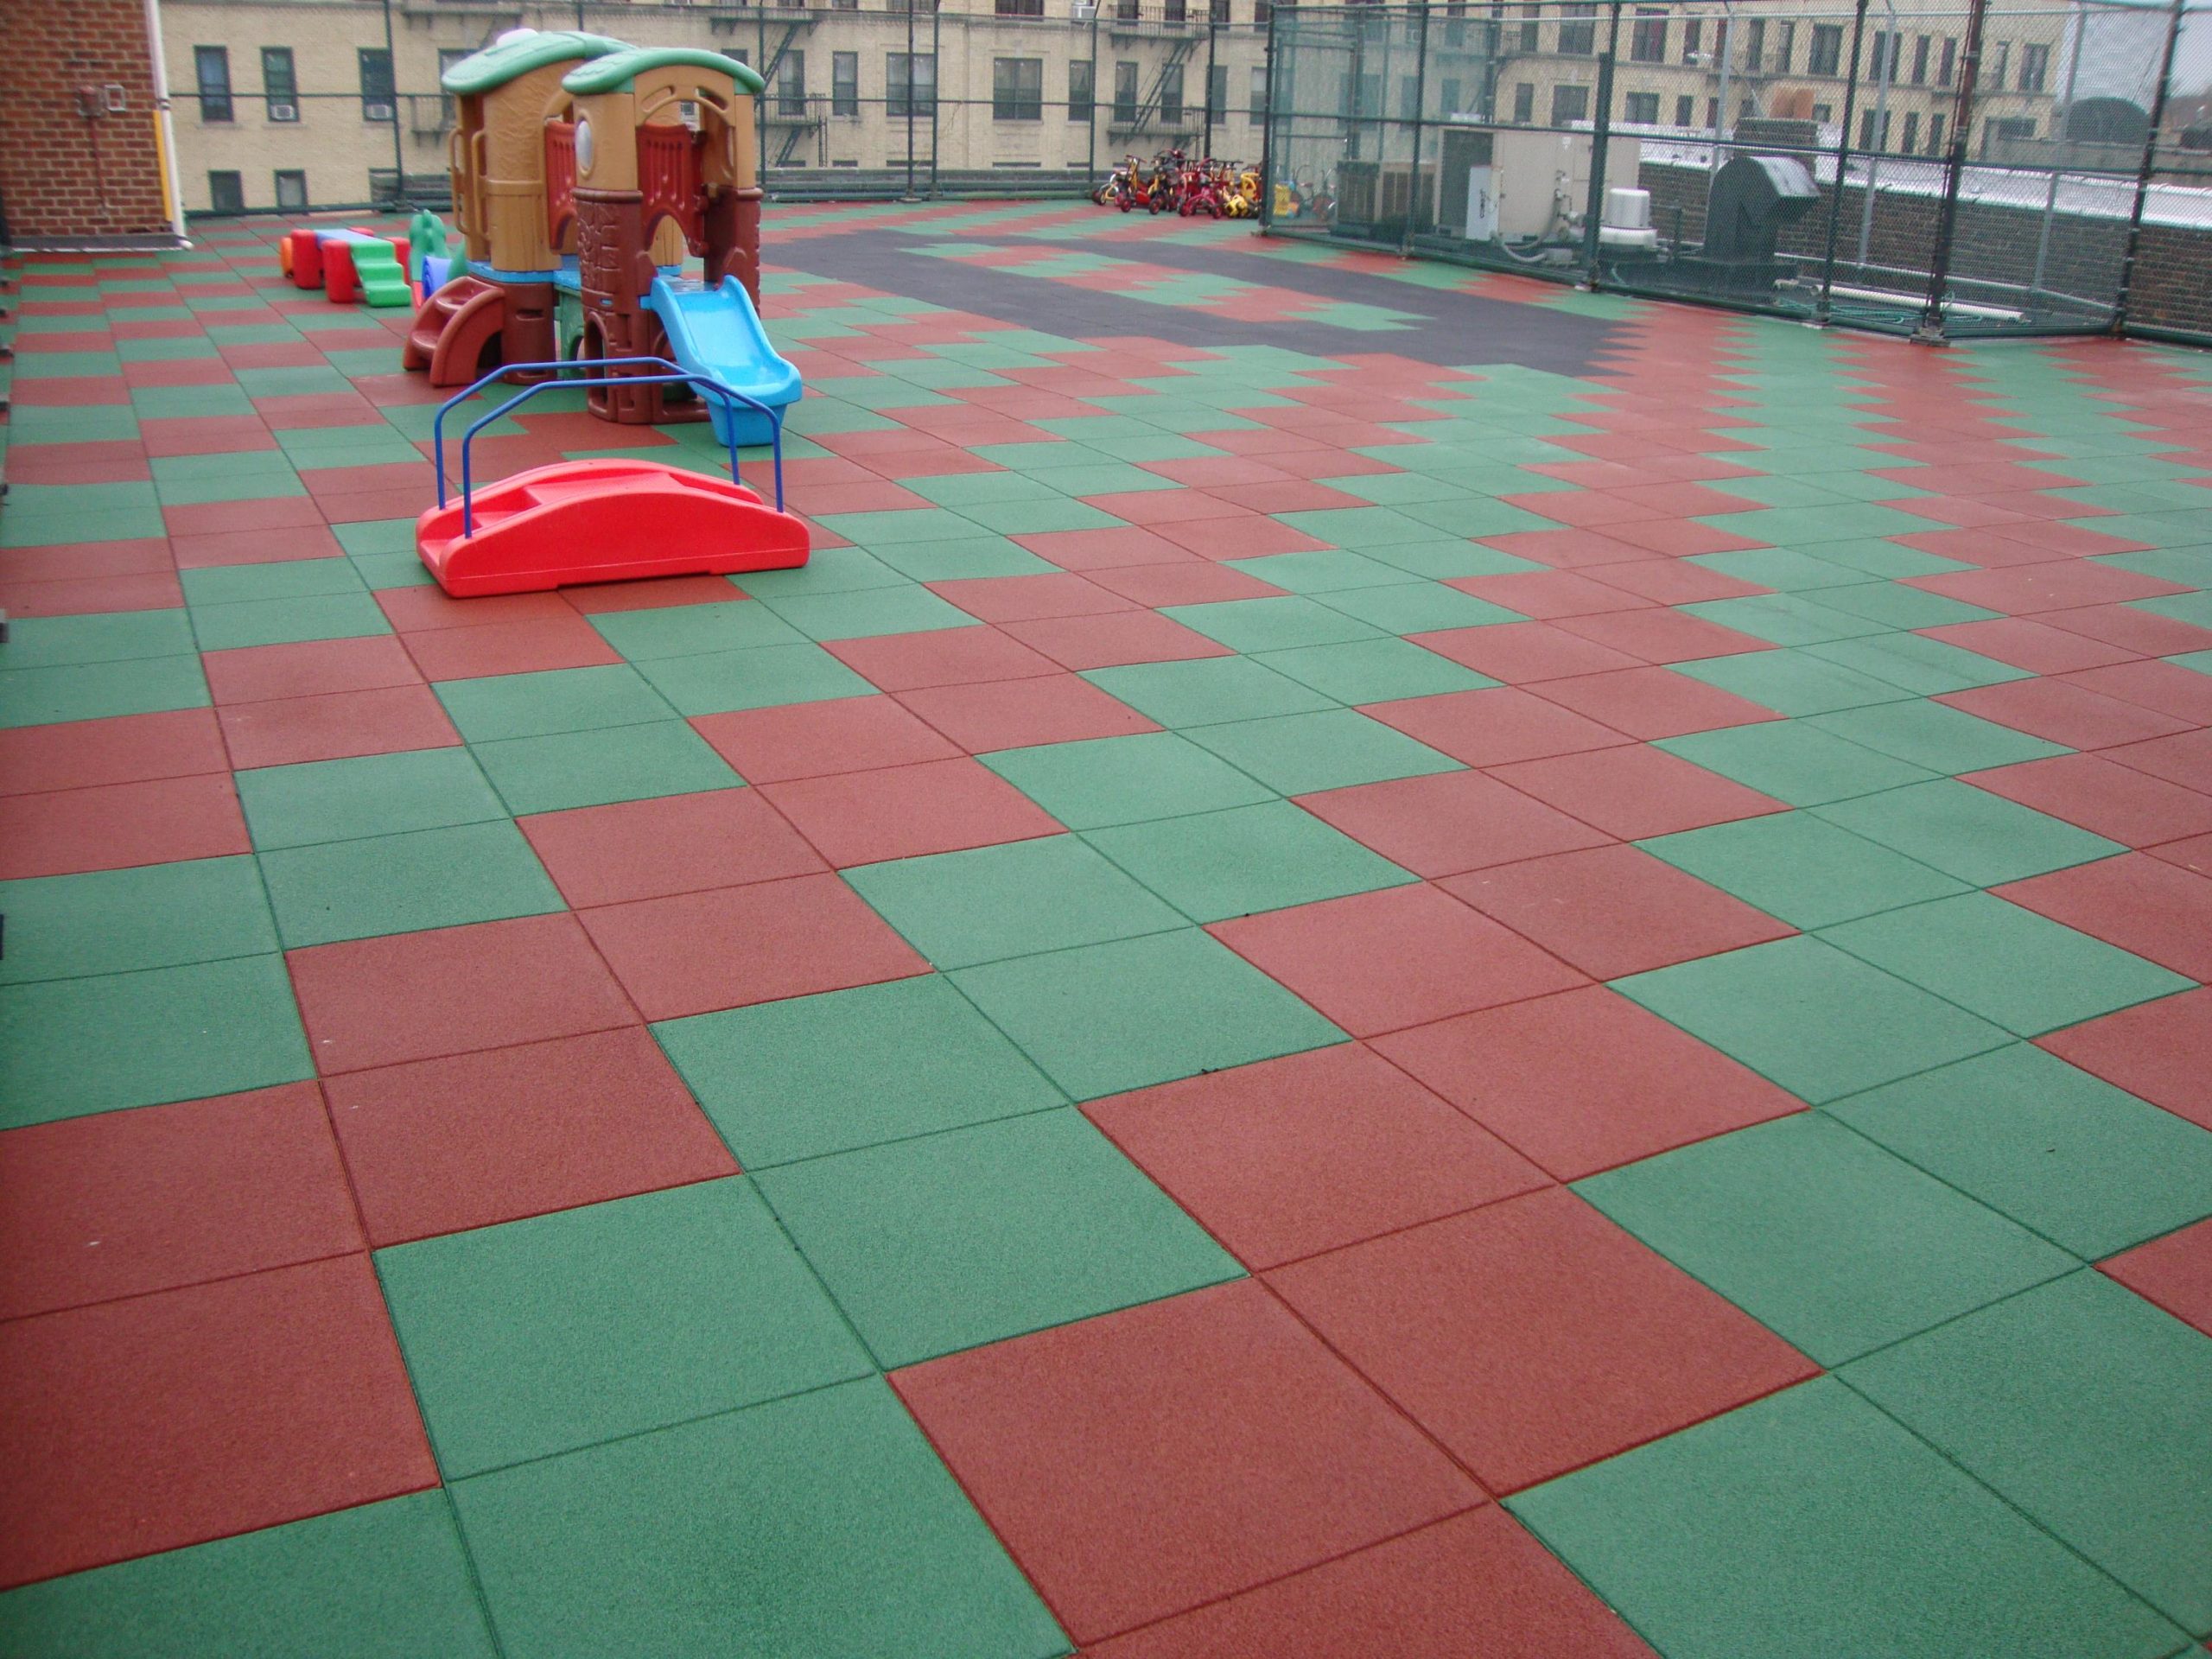 https://practicesports.com/wp-content/uploads/2022/08/UNITY-on-Pal-M-Schwartz-School-Rooftop-Playground-in-NYC-HR2-scaled.jpg